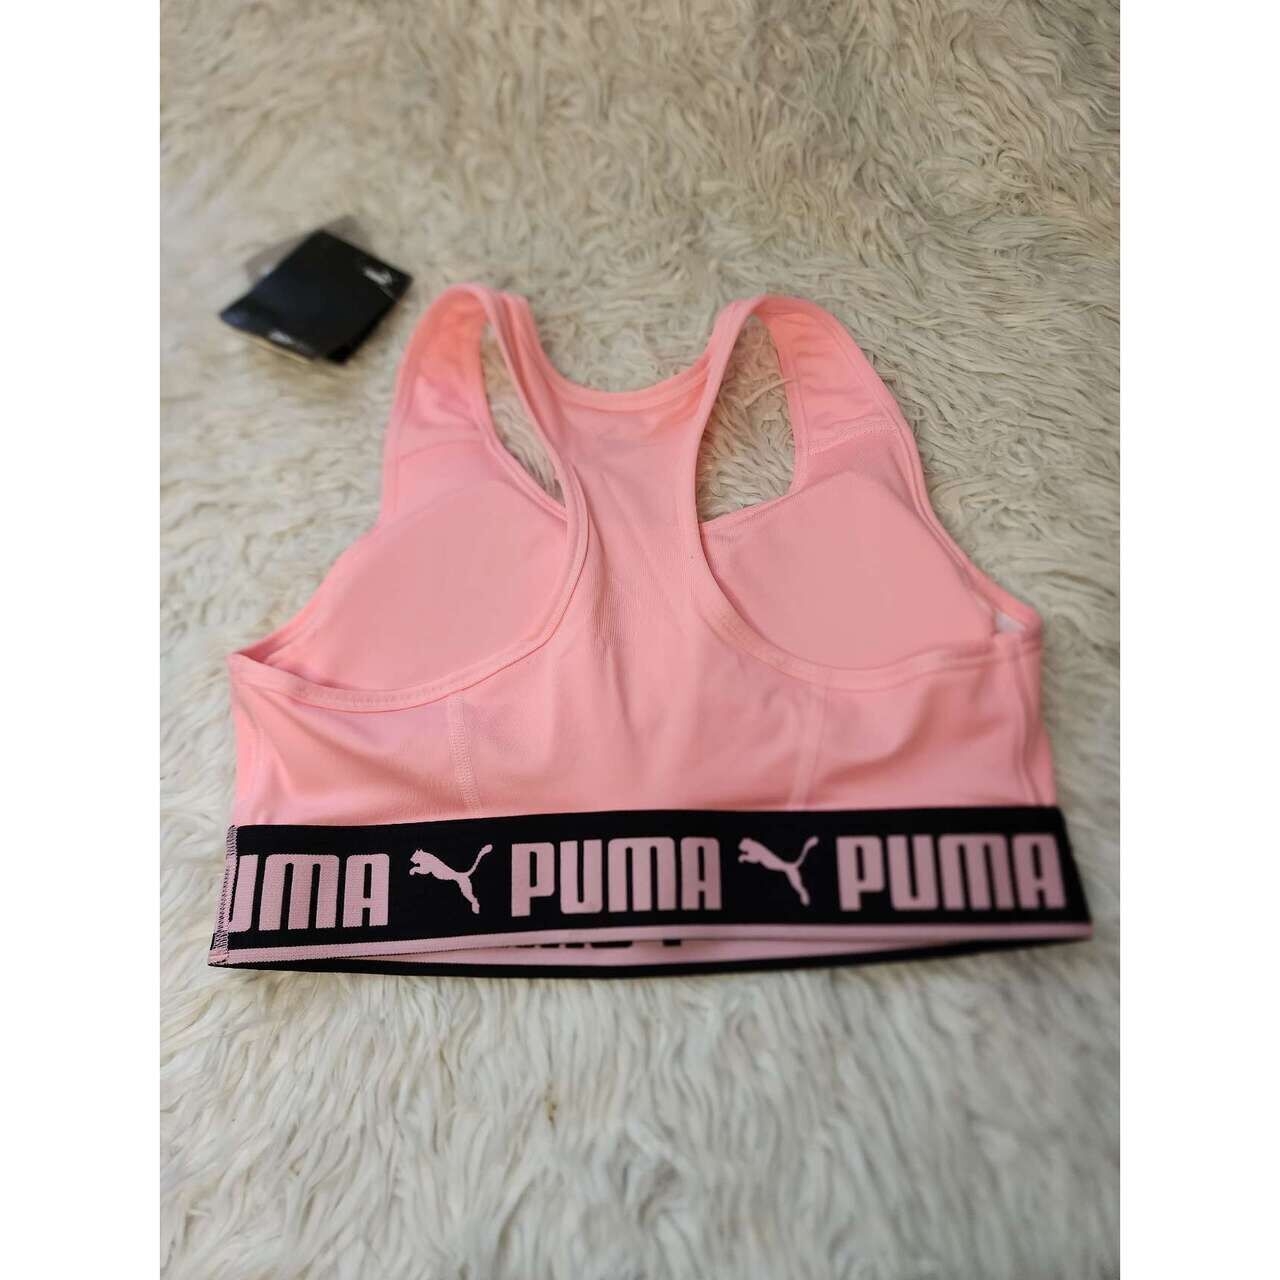 Puma Drycell Recycled Soft Pink Sport Bra